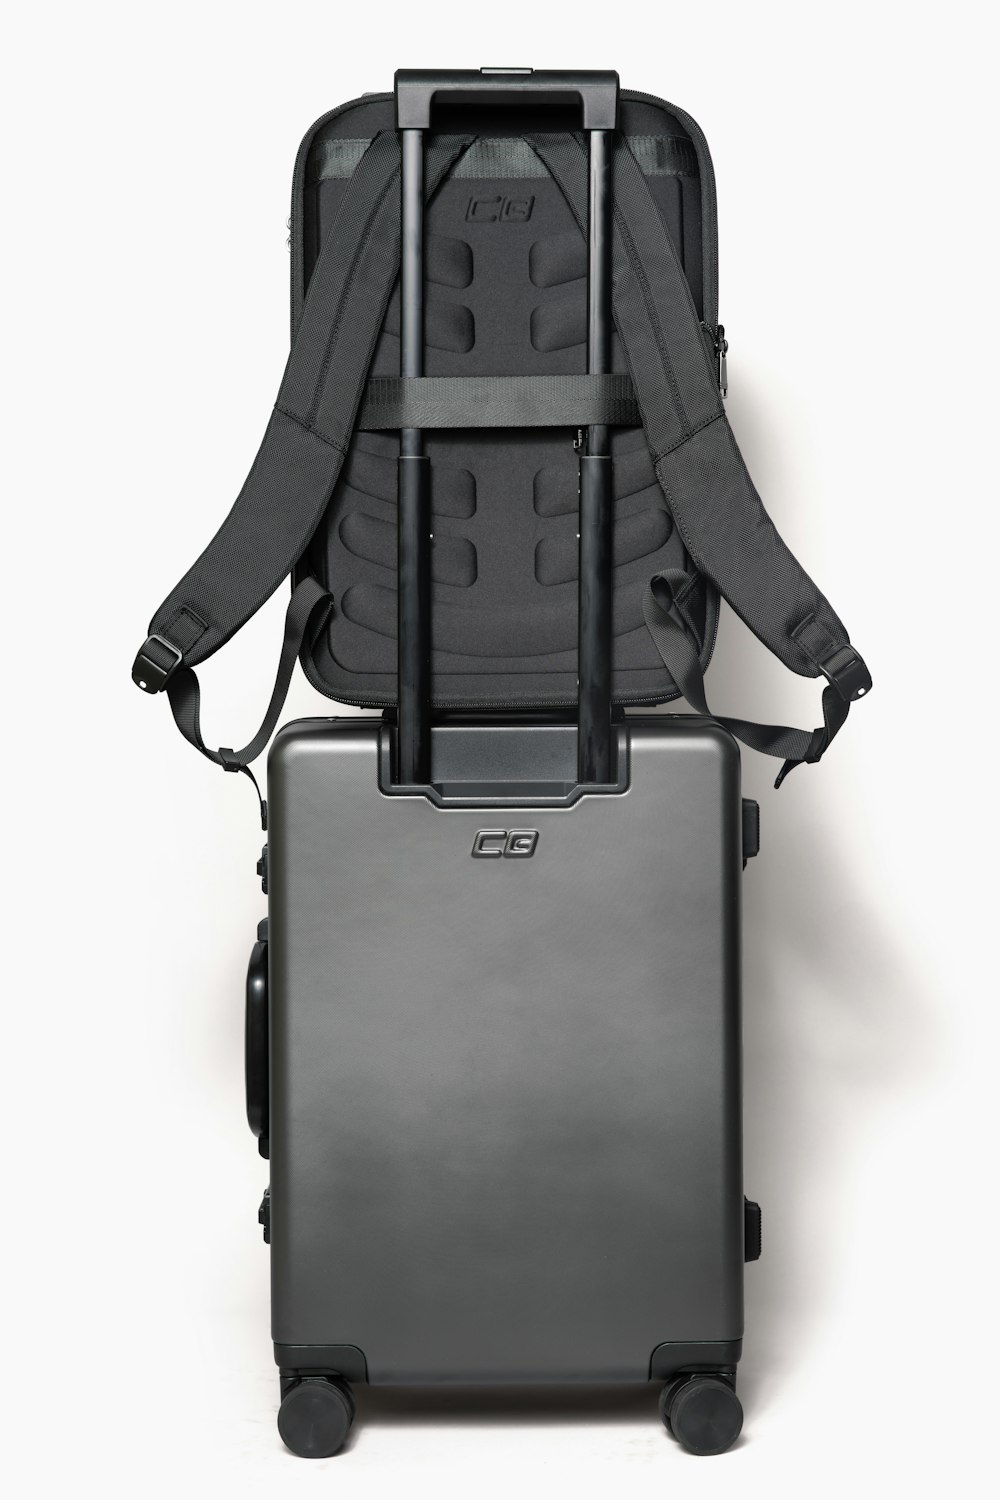 the back of a suitcase with wheels and a backpack attached to it